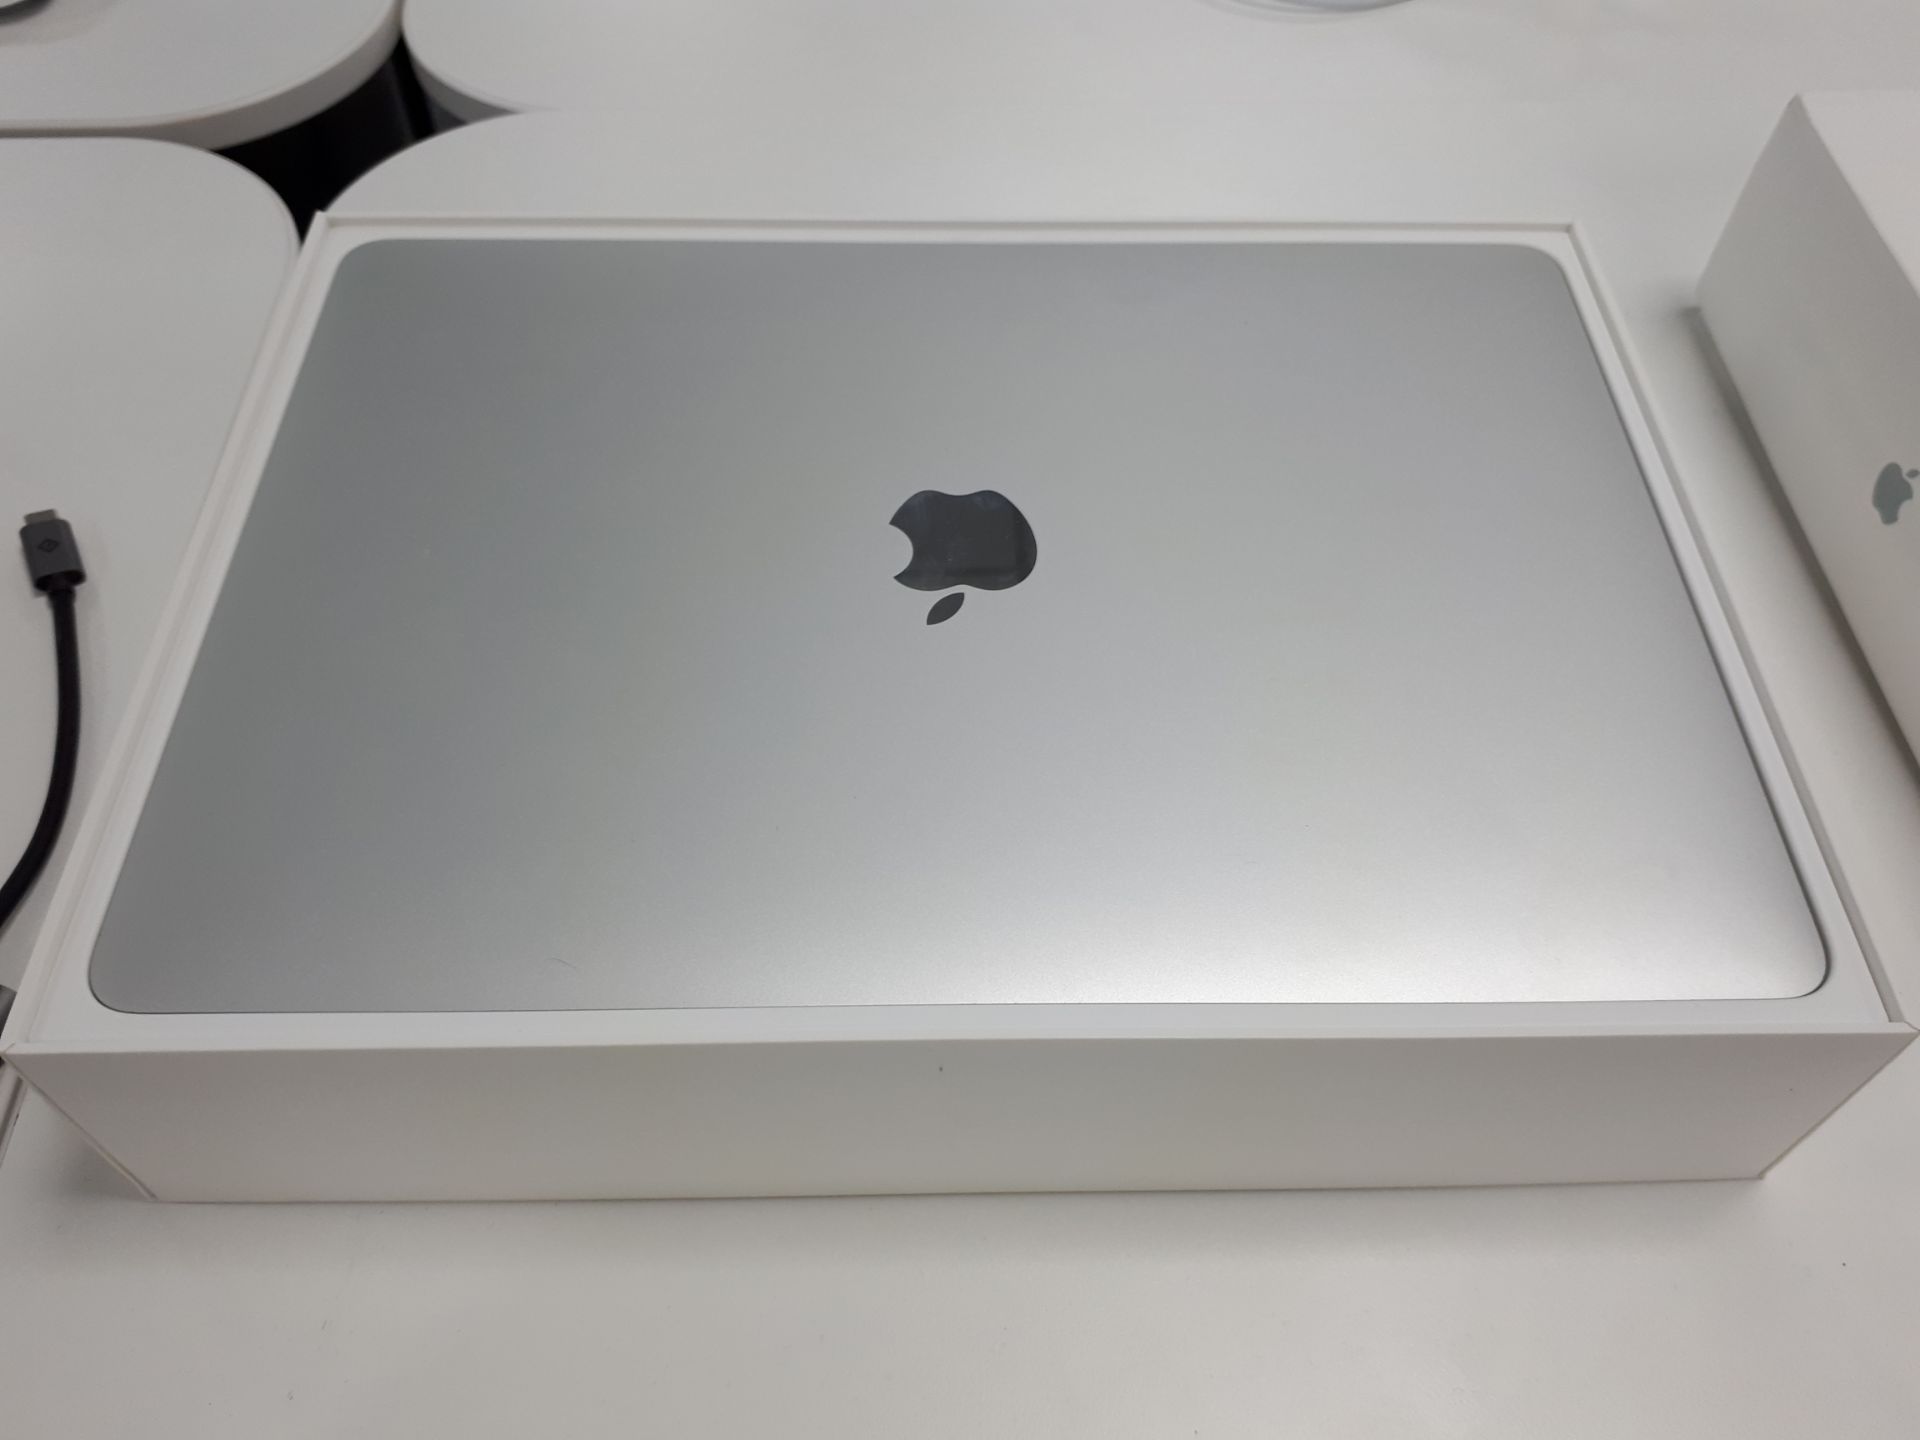 Apple A1708 13” Macbook Pro 2.3Ghz, 8GB Ram, Serial Number CO2W814DHV27 Silver (Apple Refurbished) - Image 2 of 3